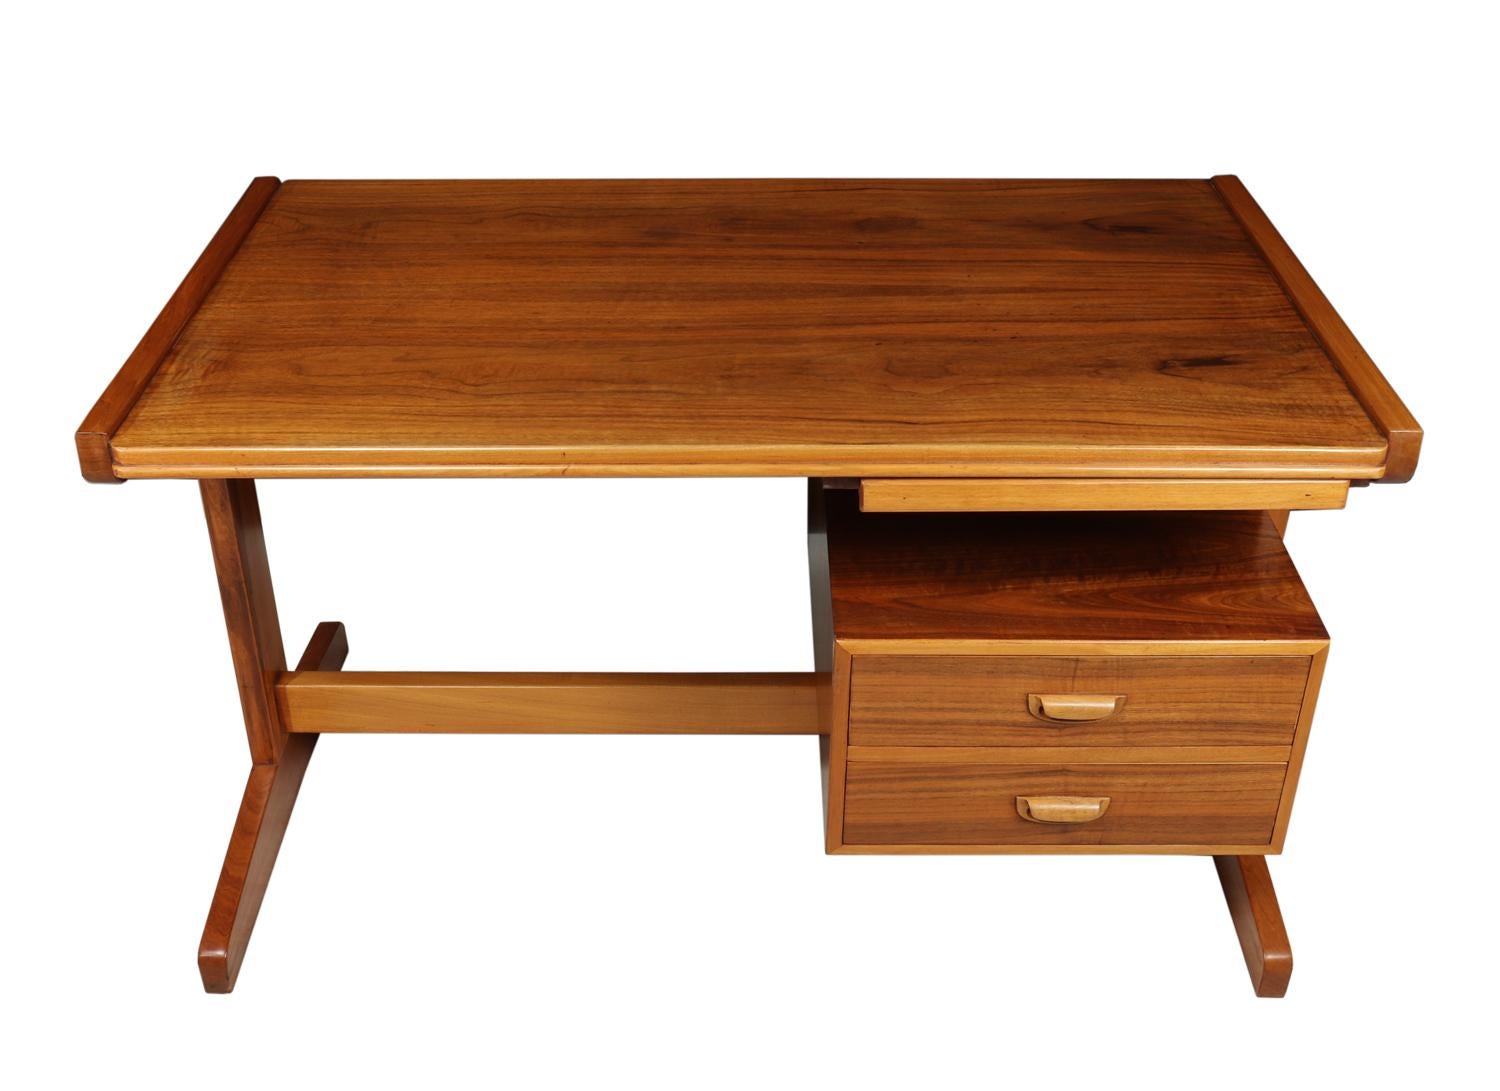 Retro desk in walnut, circa 1960
A good sized writing desk with two drawers and pull out slide produced in walnut with sculpted handles, the desk has been fully polished and is in excellent condition throughout

Age: 1960

Style: Mid-Century